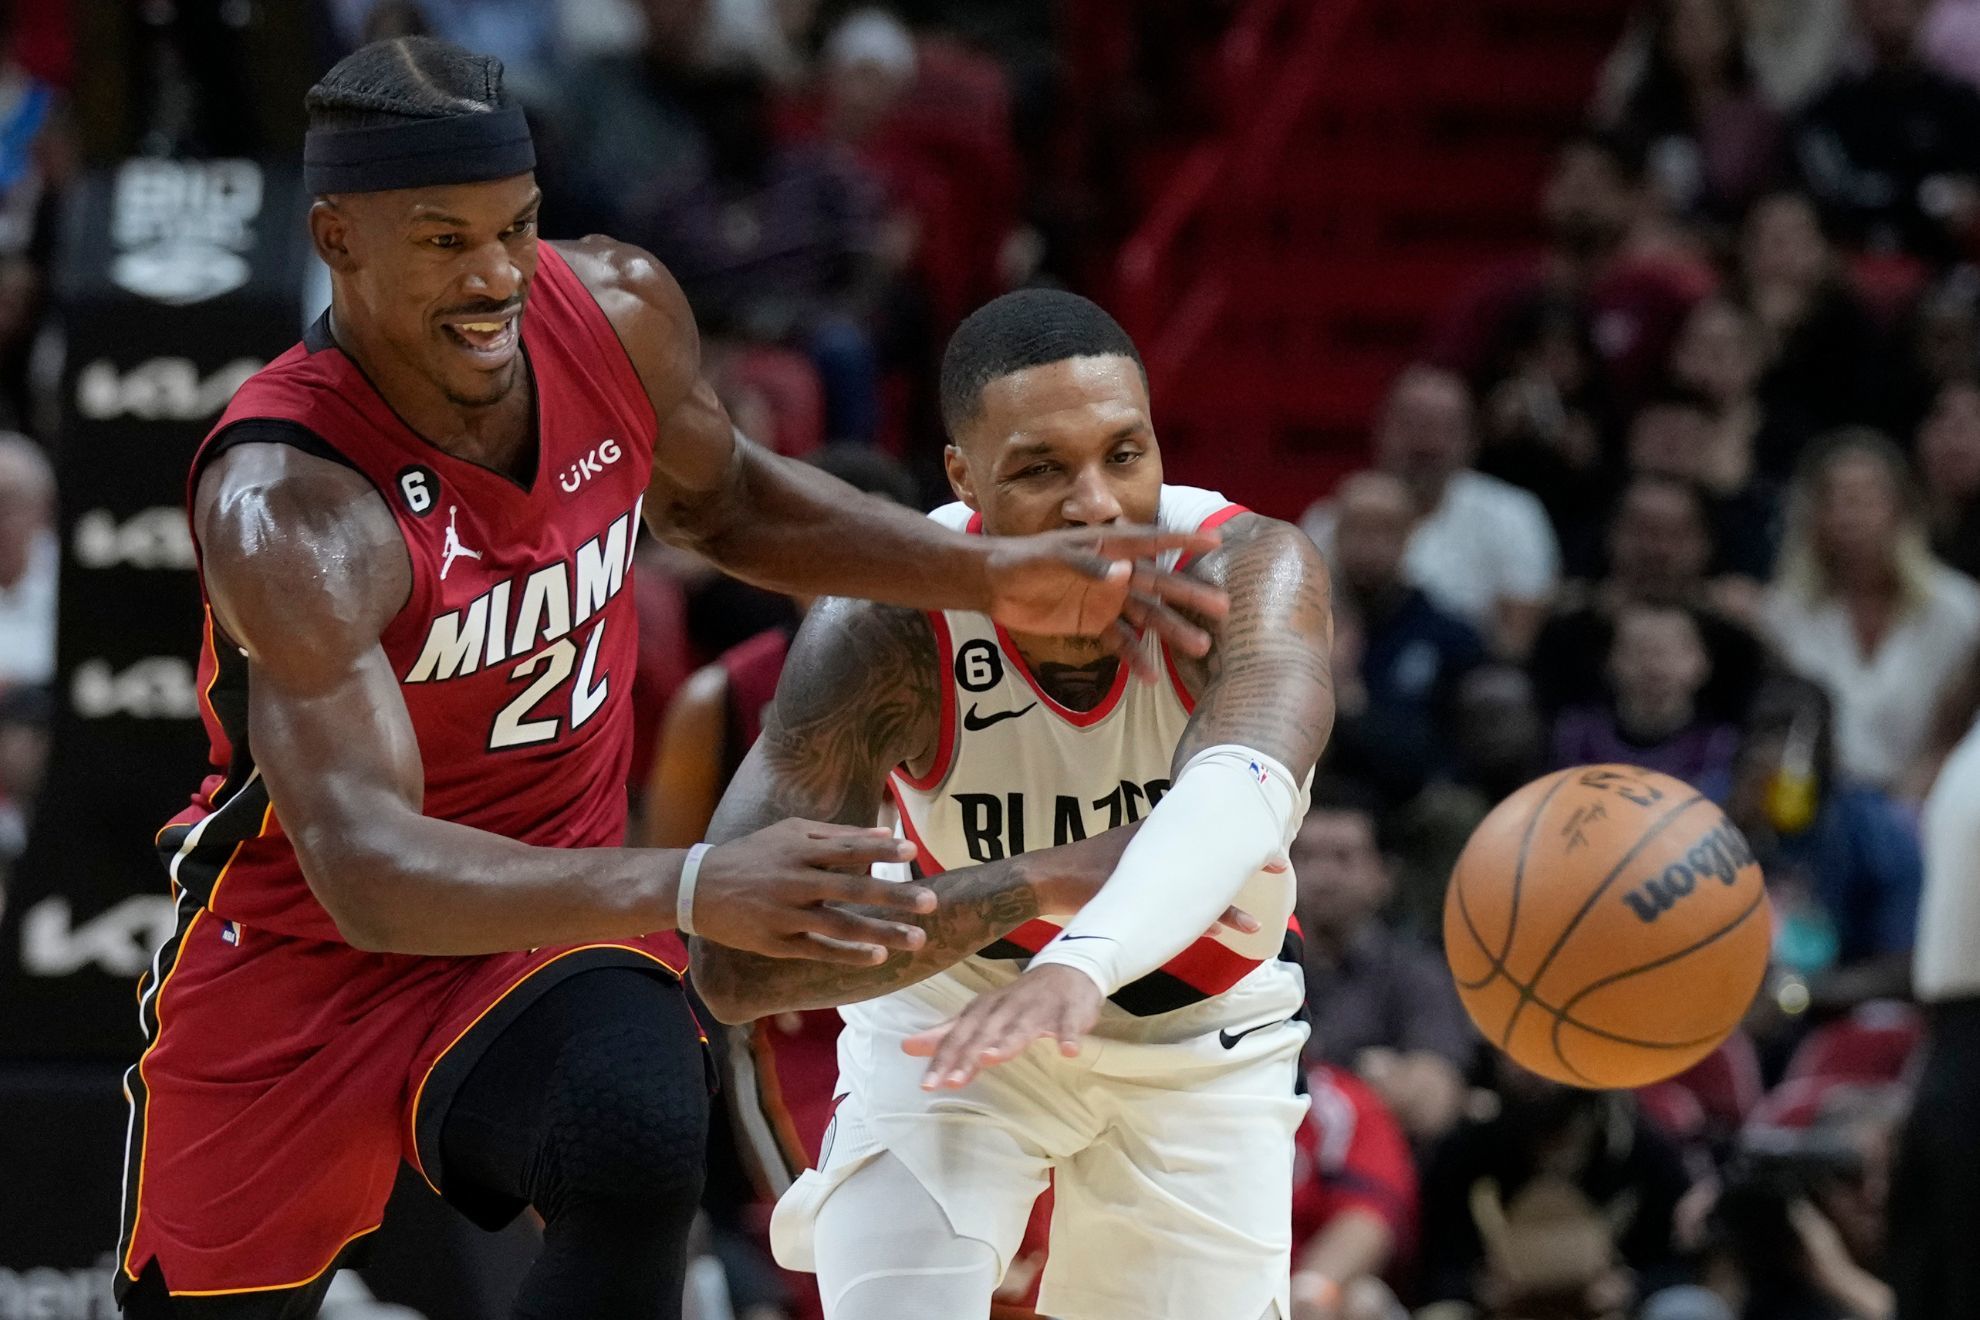 Damian Lillard's agent explains why NBA star was listening to 'Miami' song